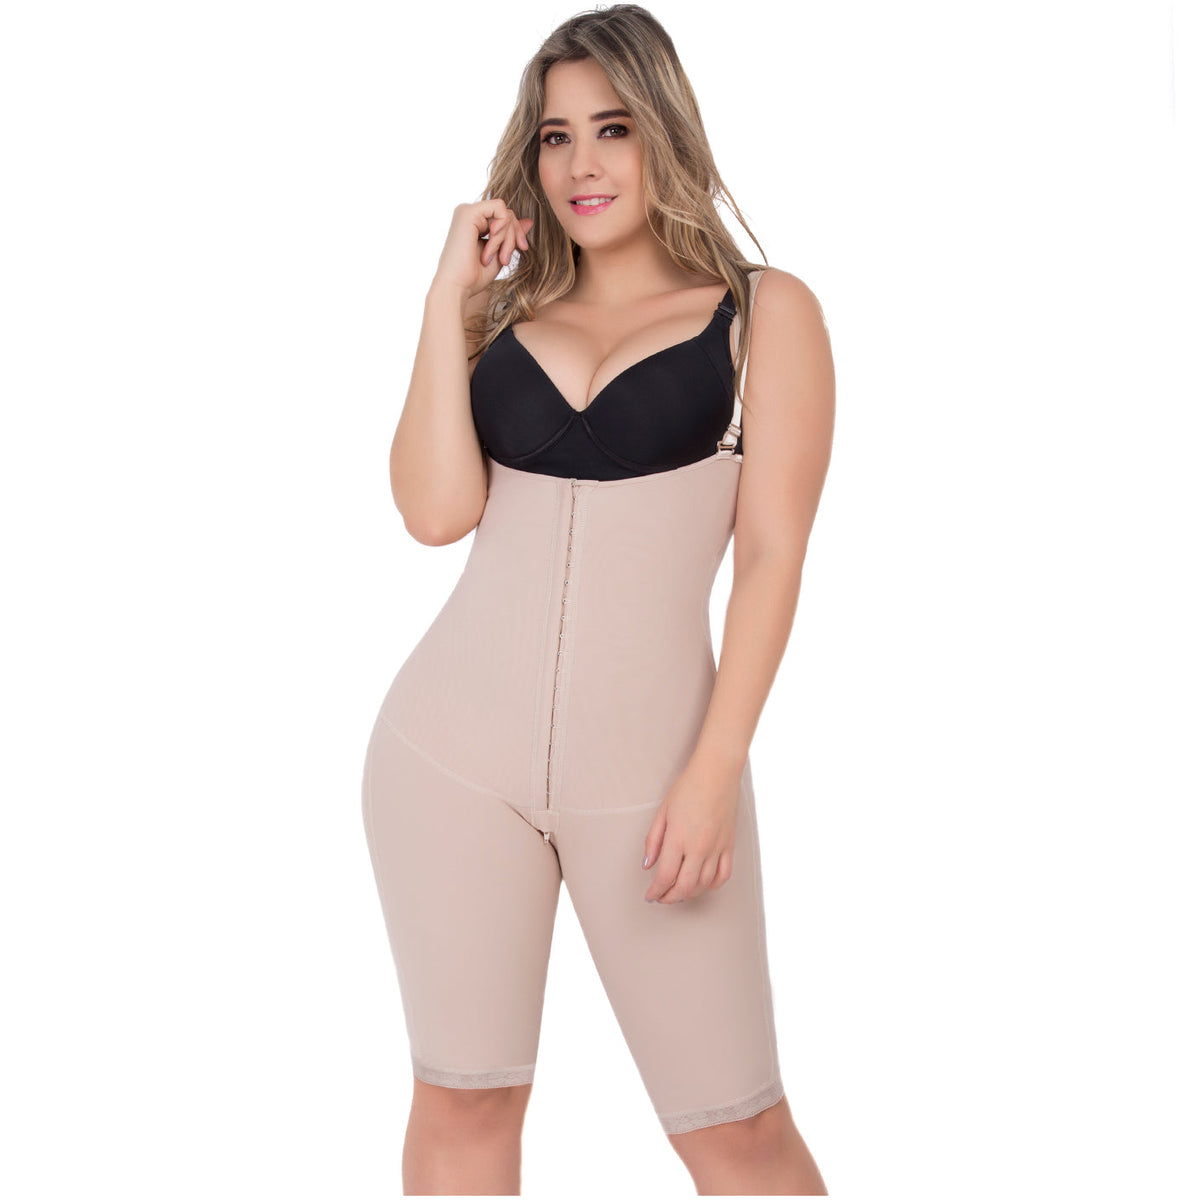 UpLady 6172 | Open Bust Body Suit | Tummy Control Butt Lifter Knee Length Bodysuit